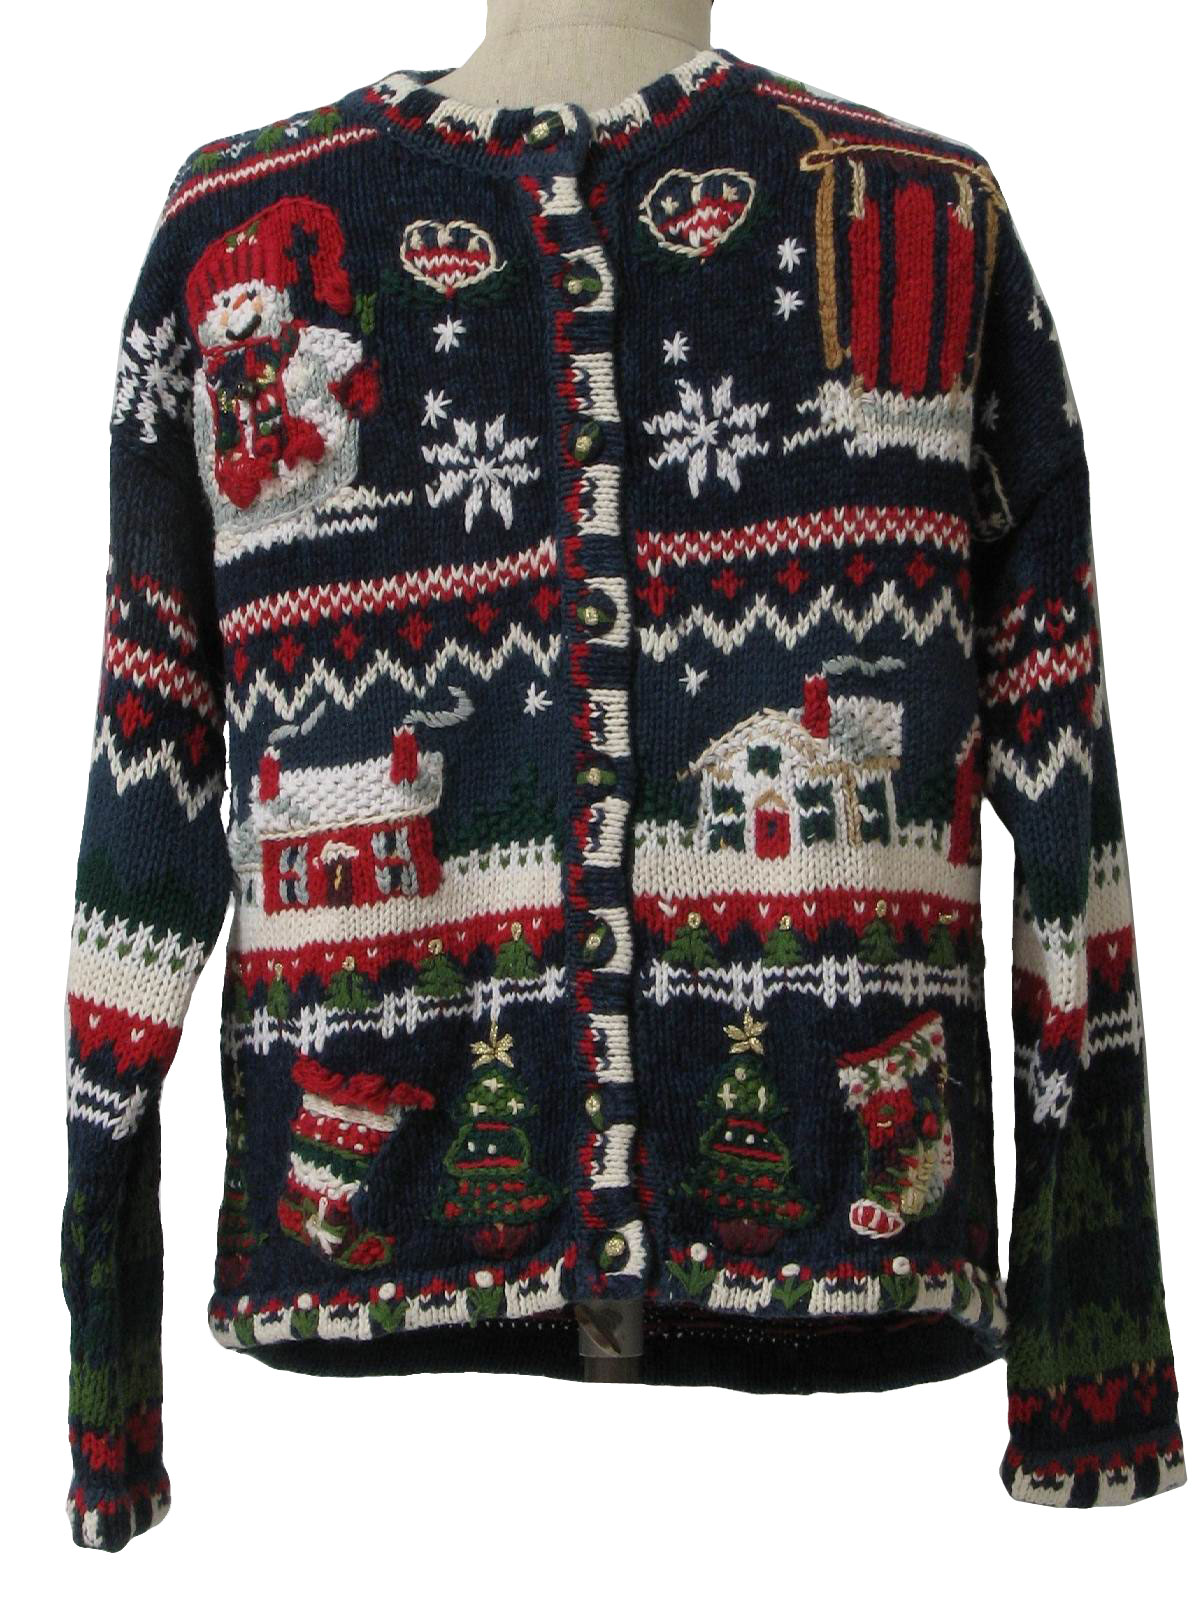 Womens Ugly Christmas Sweater: -Heirloom Collectibles- Womens navy blue ...